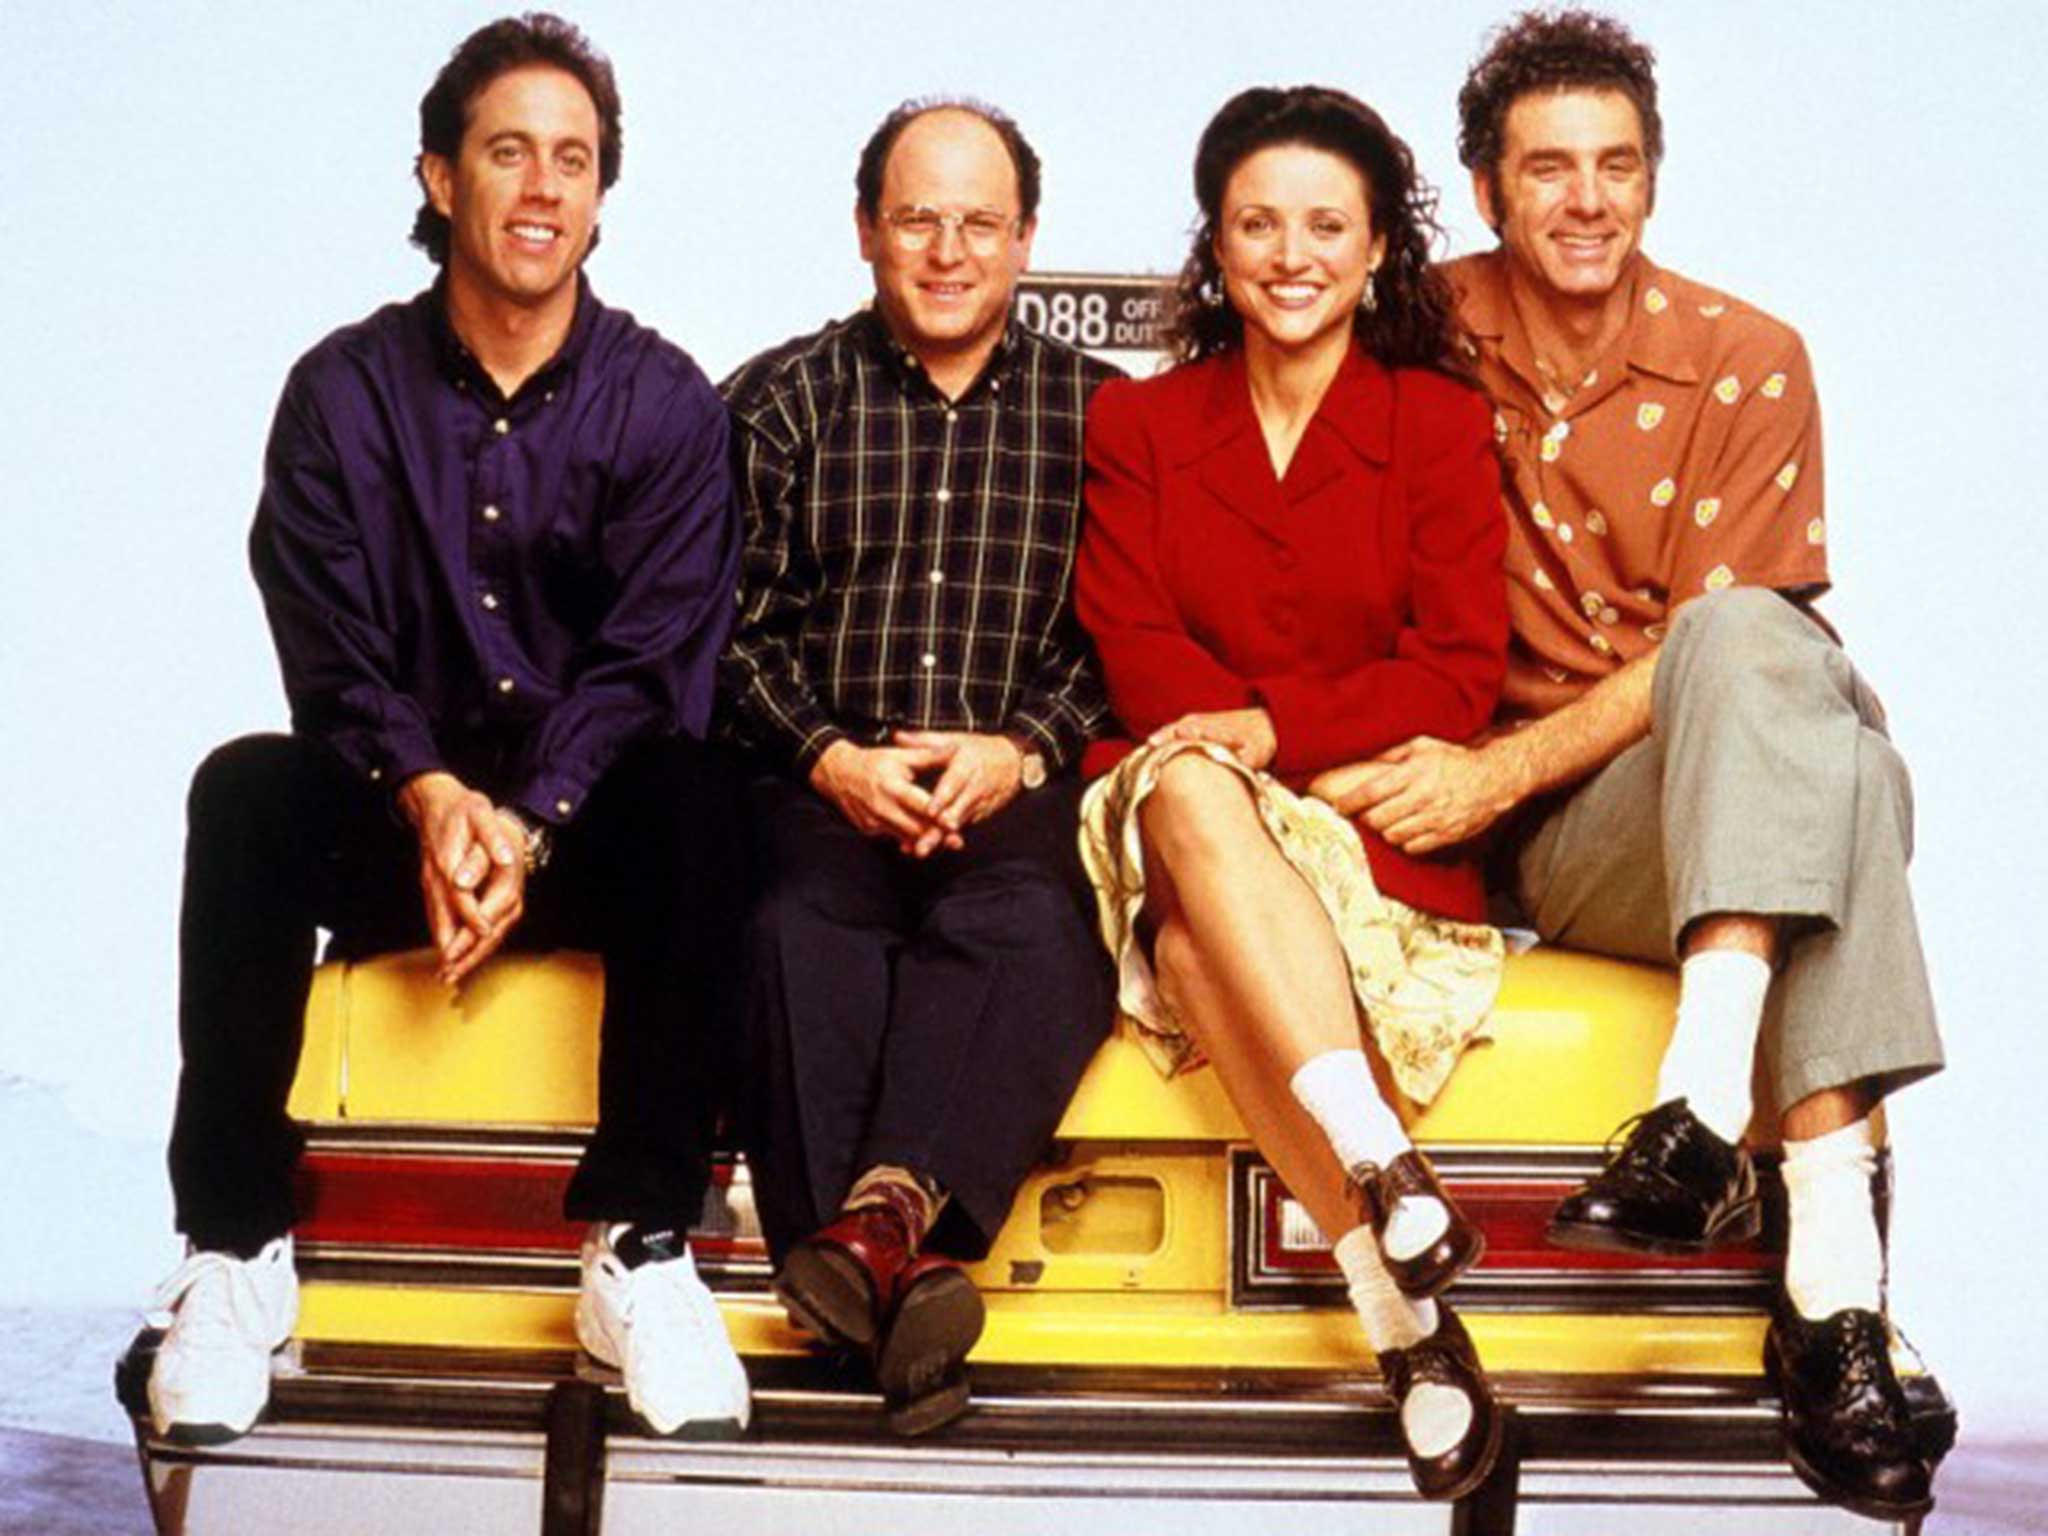 Although it never won an Emmy, ‘Seinfeld’ is widely regarded as one of the greatest and most influential sitcoms of all time